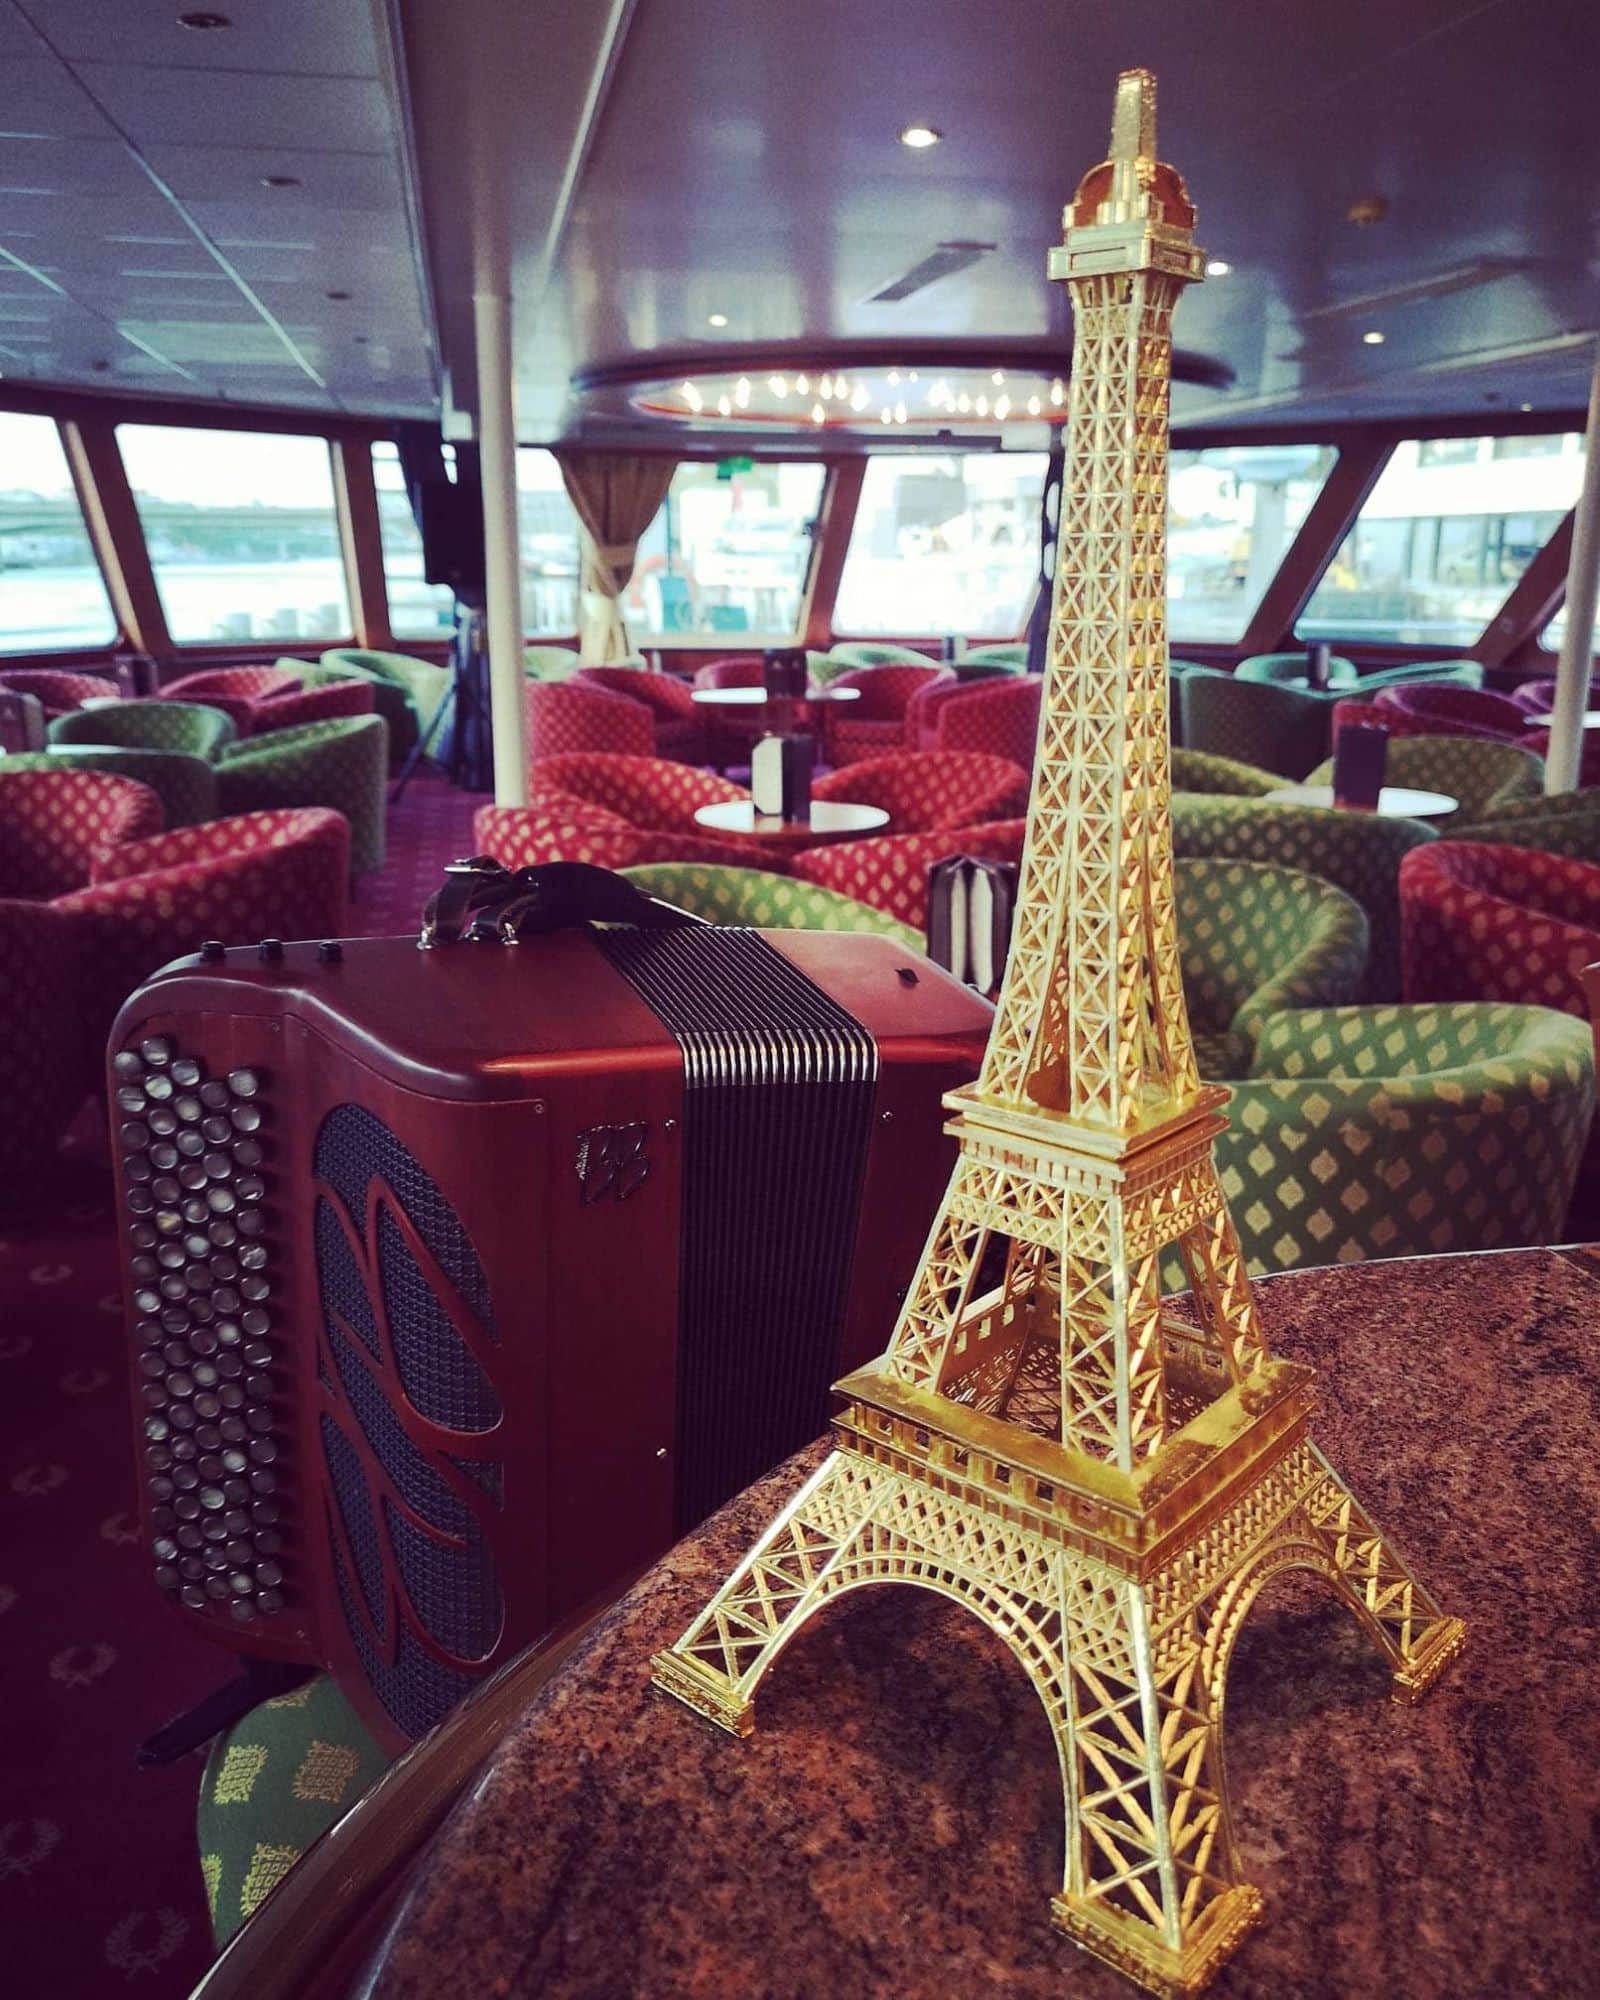 accordion from Paris with eiffel tower during a cruise